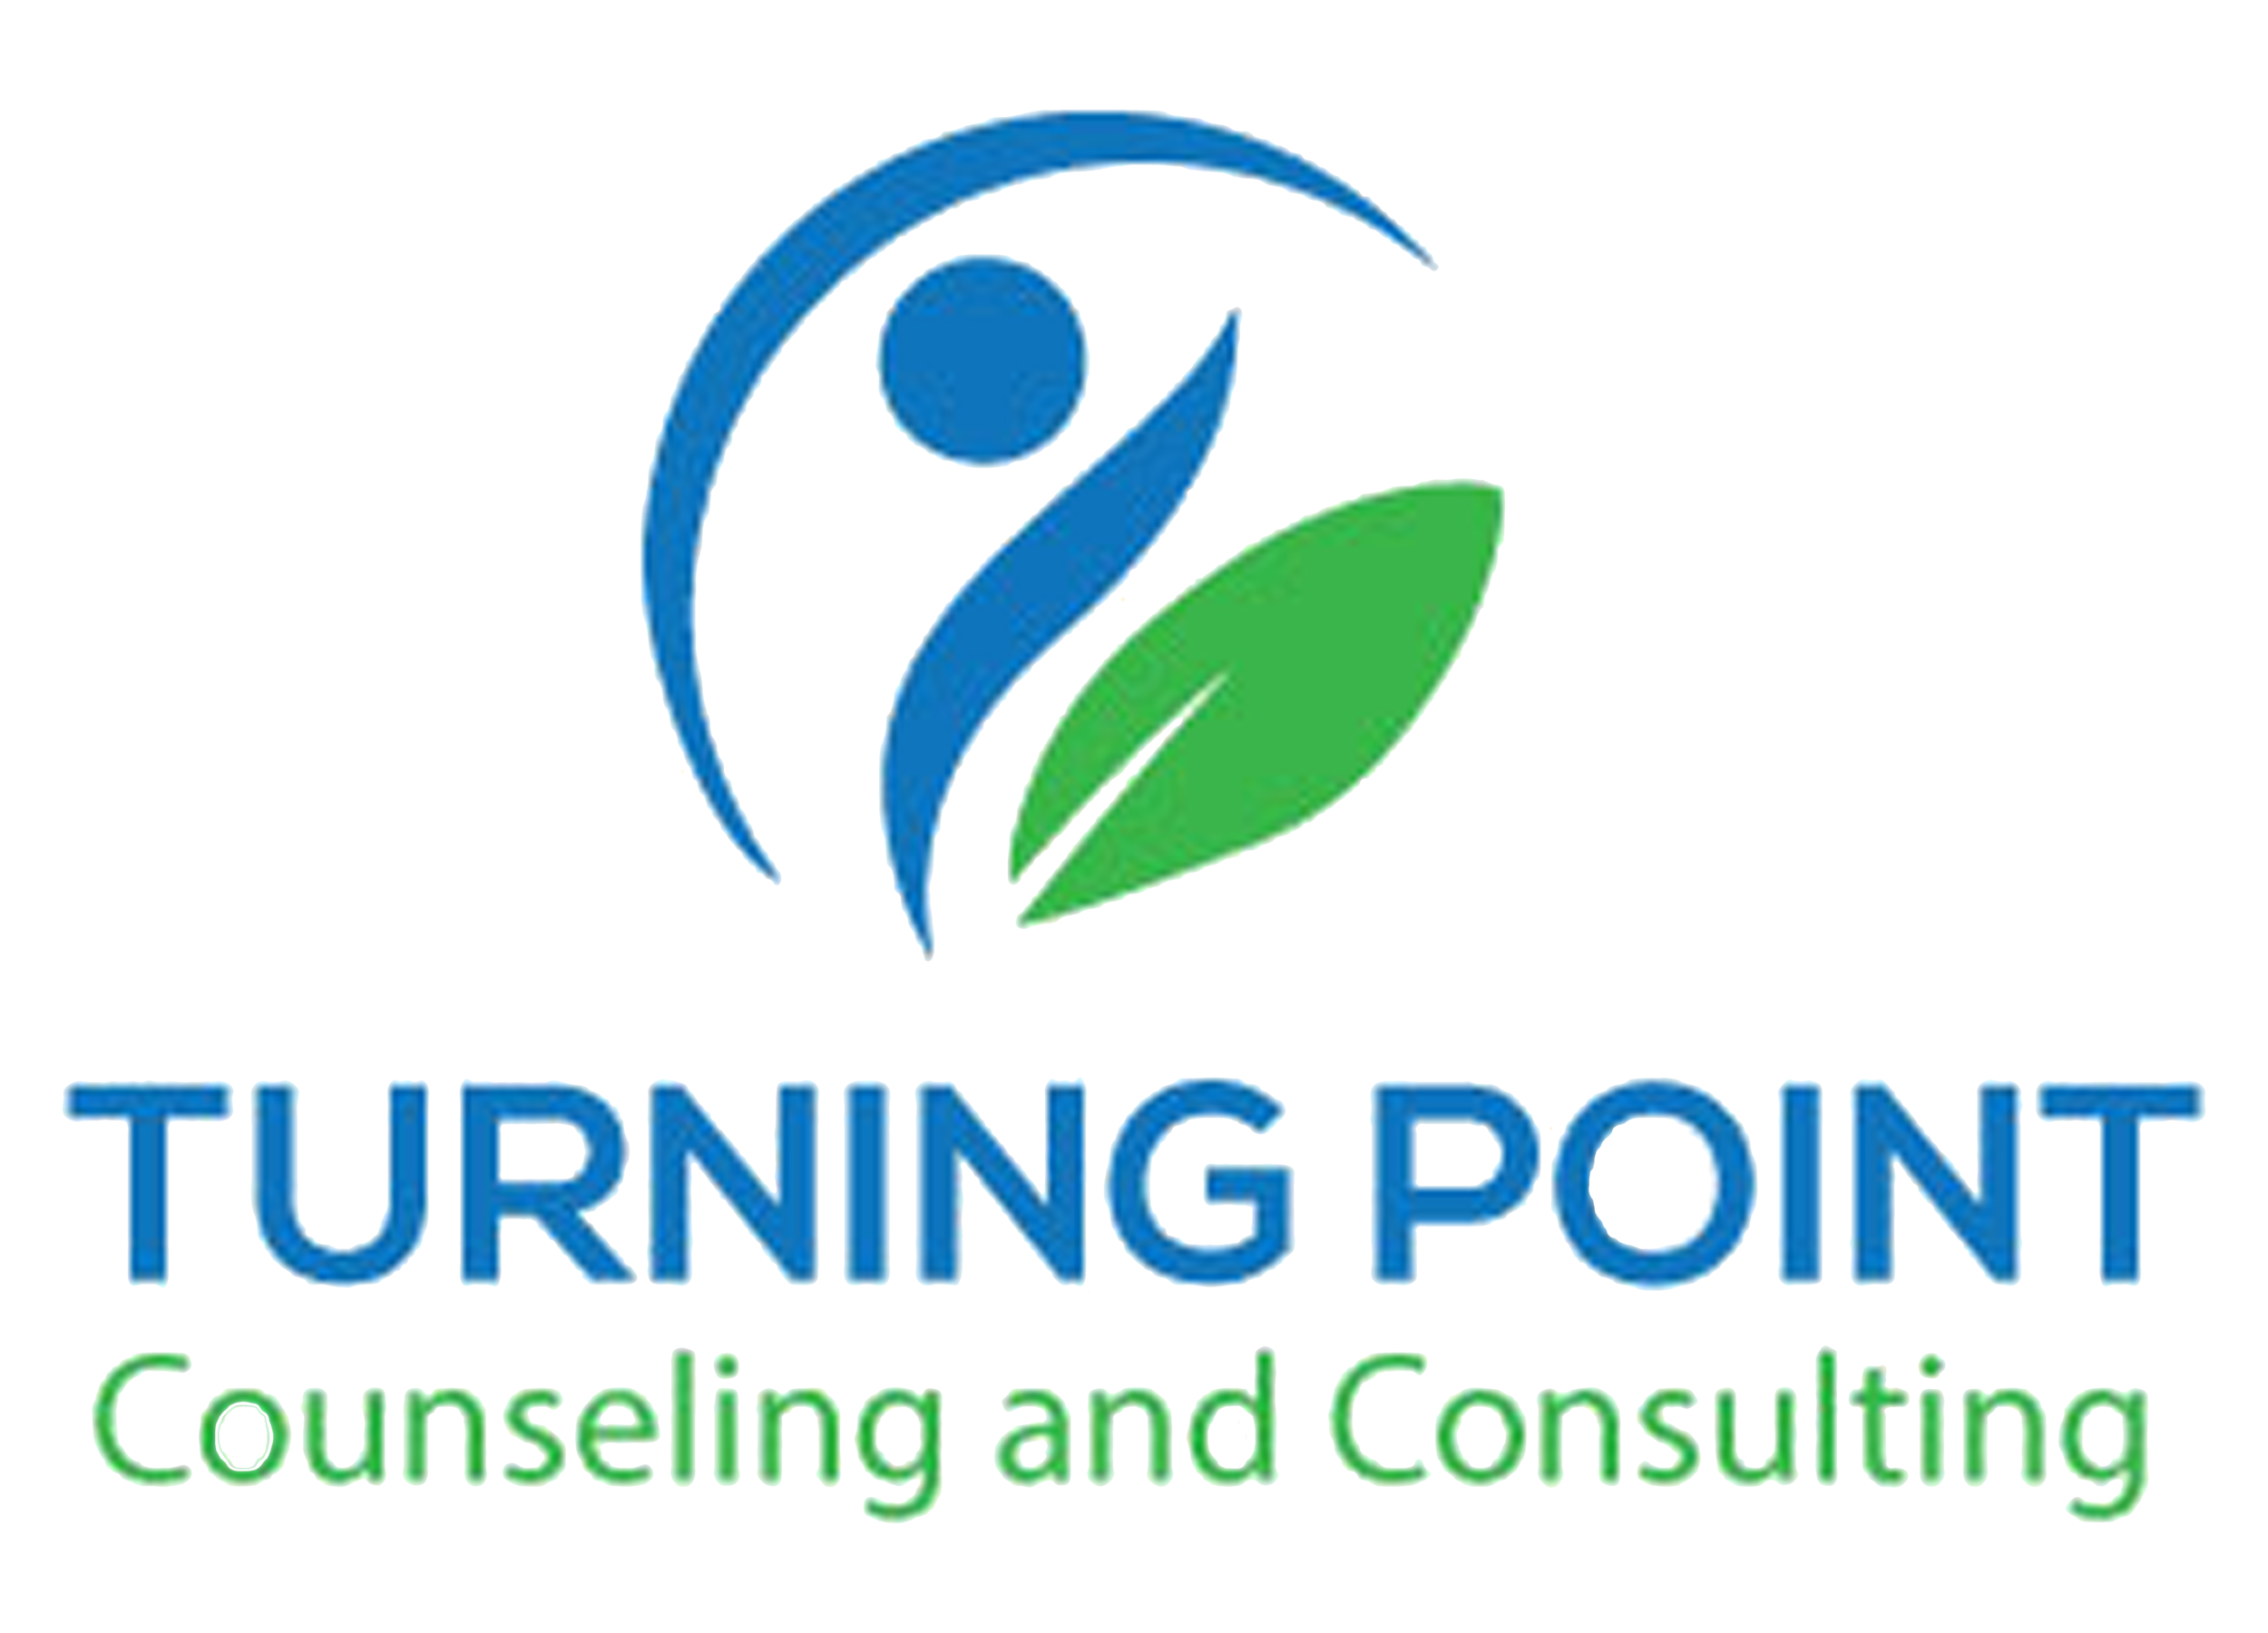 Turning Point Counseling and Consulting